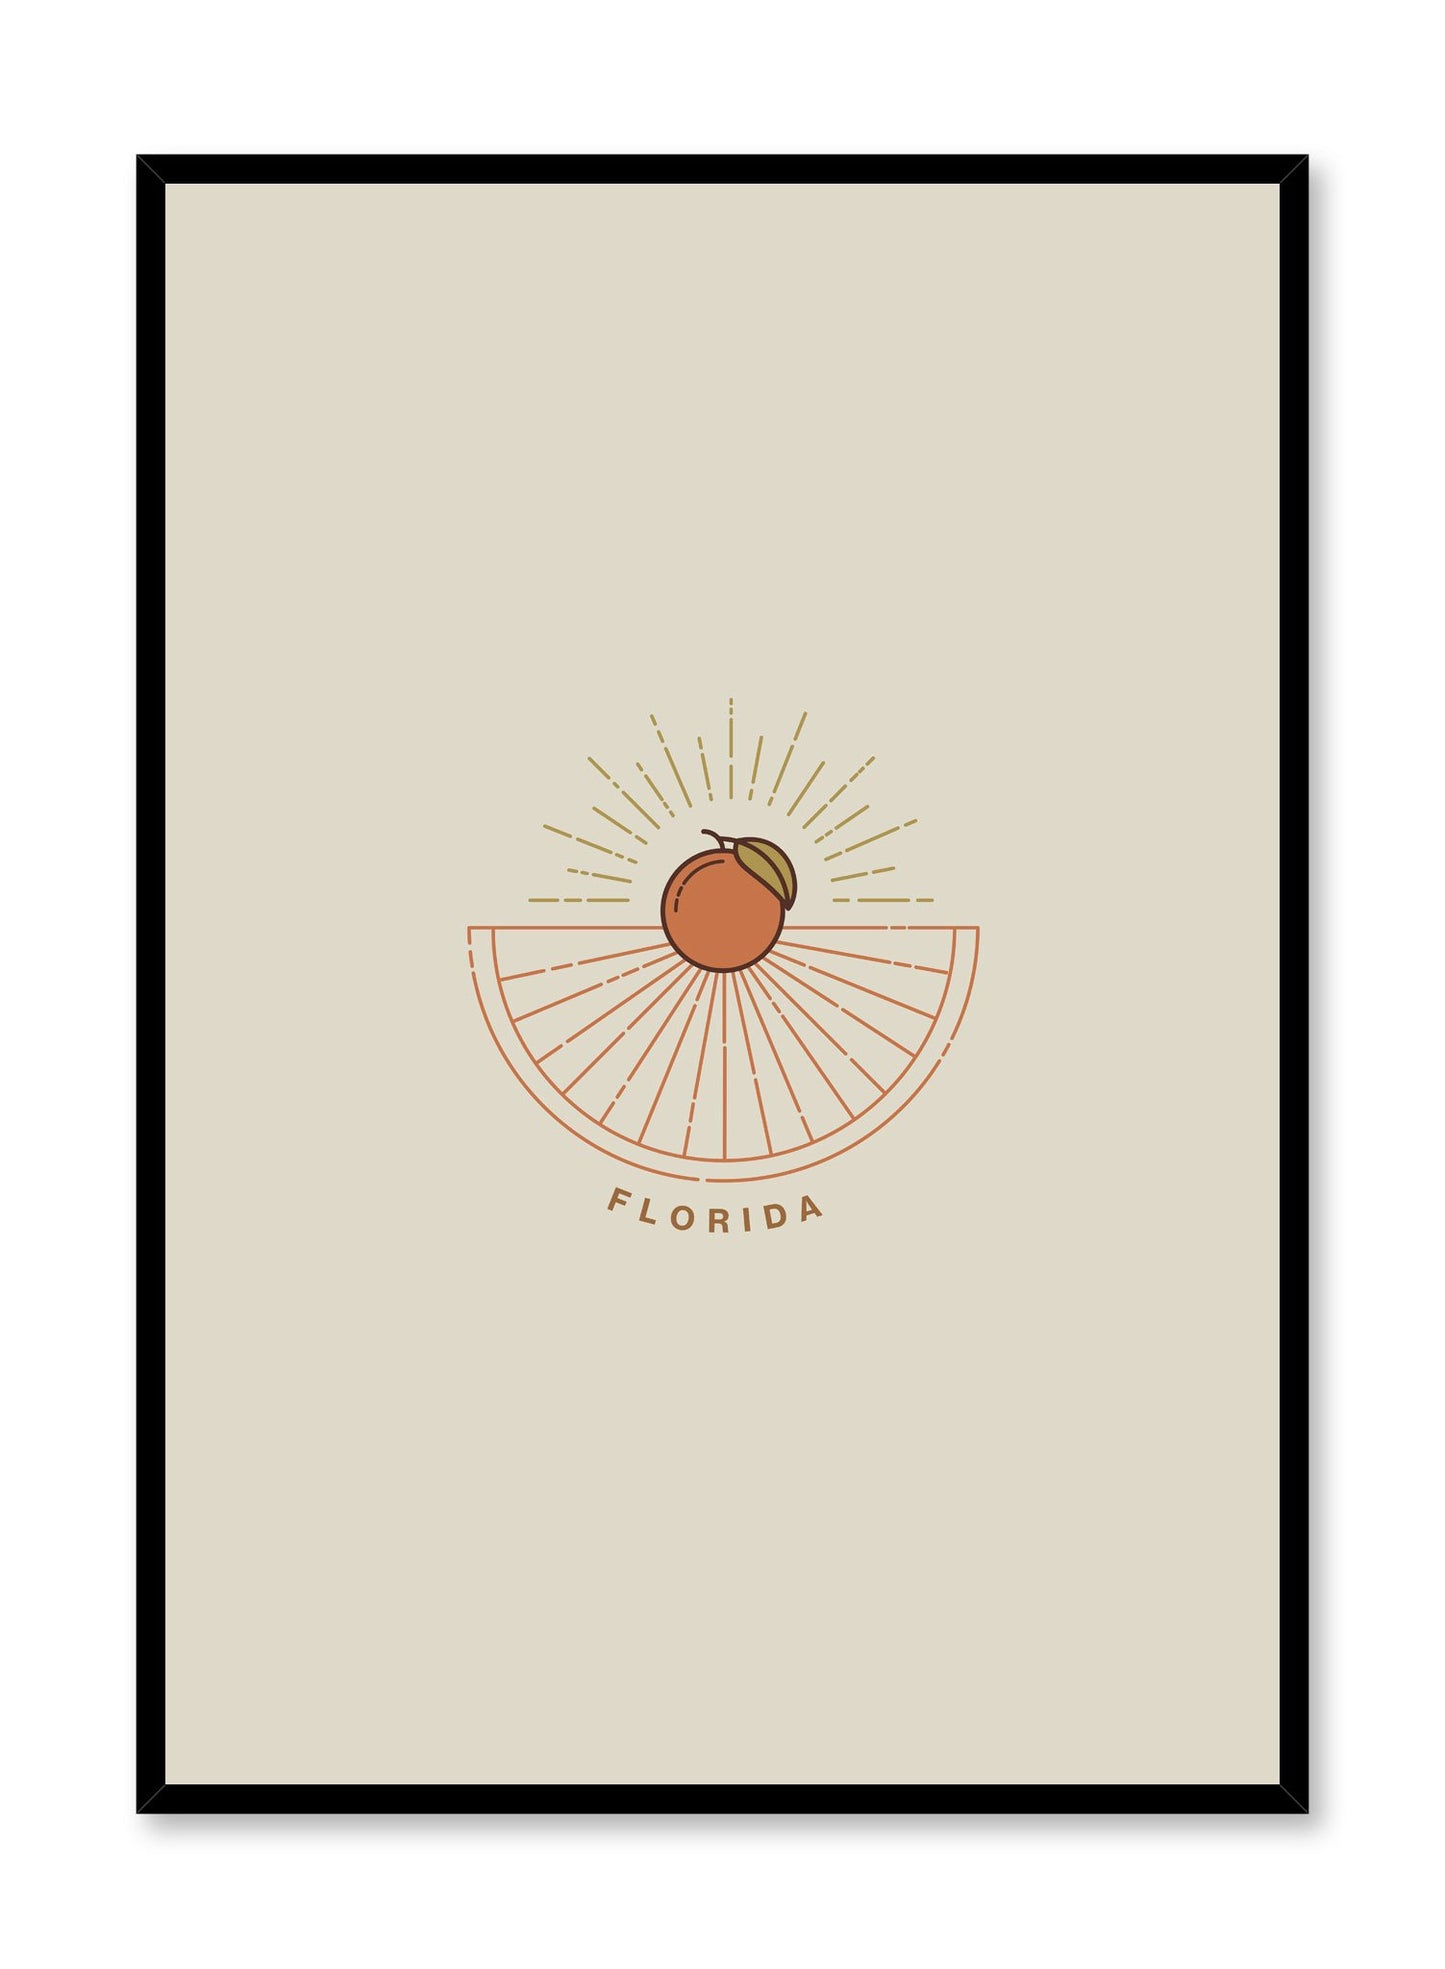 Minimalist design poster by Opposite Wall with Florida abstract graphic design of landscape and oranges